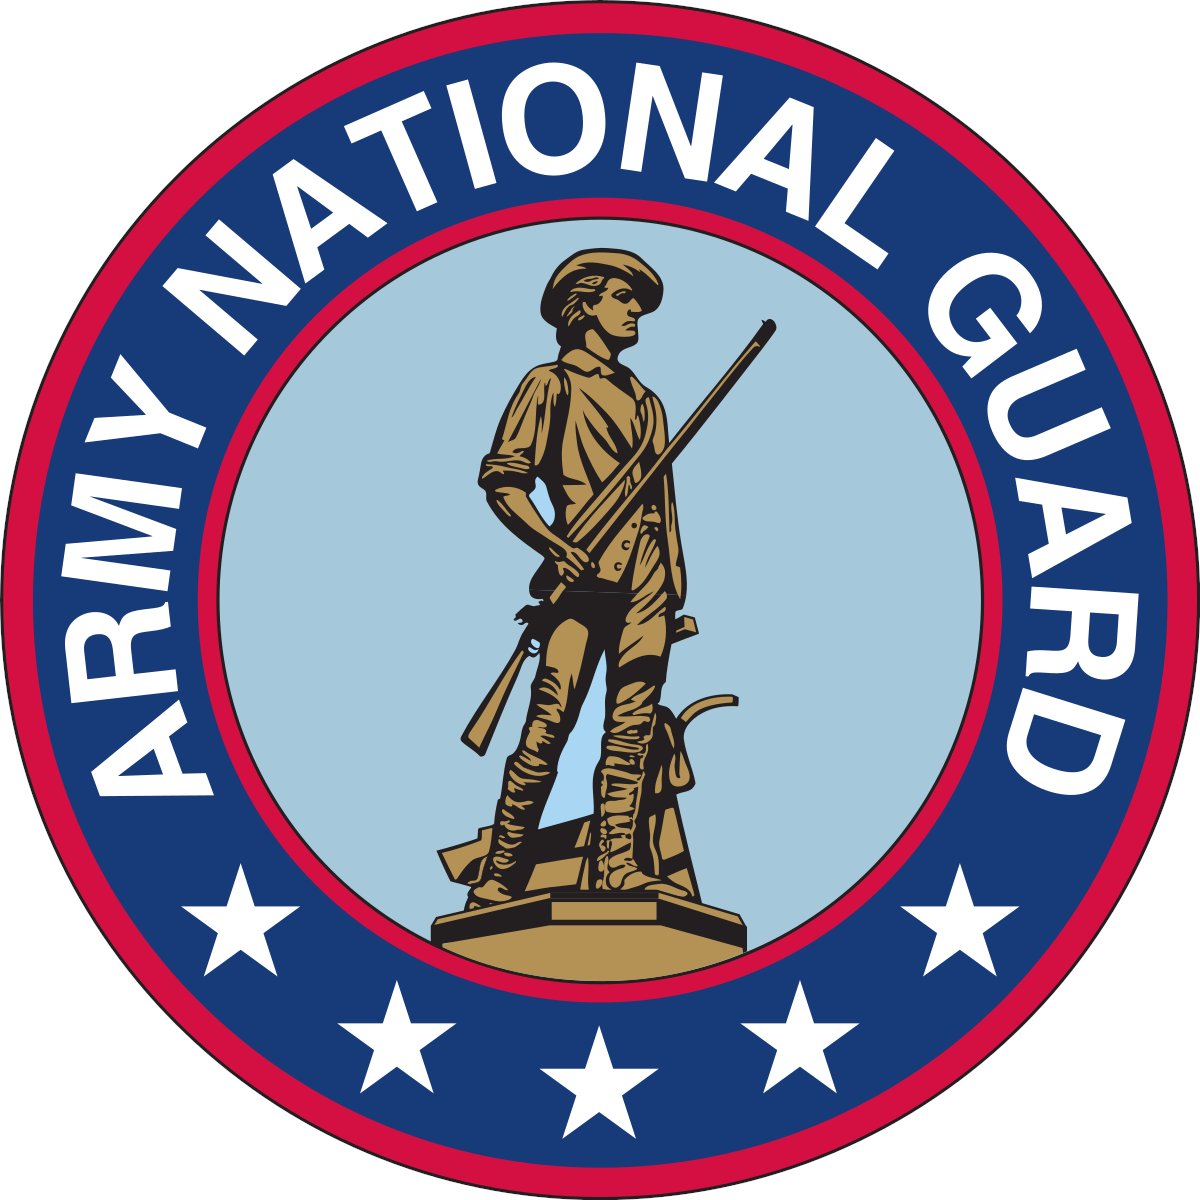 Facing the struggles of significantly lower funding, fewer options to push for new equipment, and the National Defense Act of 1920 basically saying we don’t need an expandable Army, we can fill the need with citizen soldiers through the Reserve Corps and National Guard –